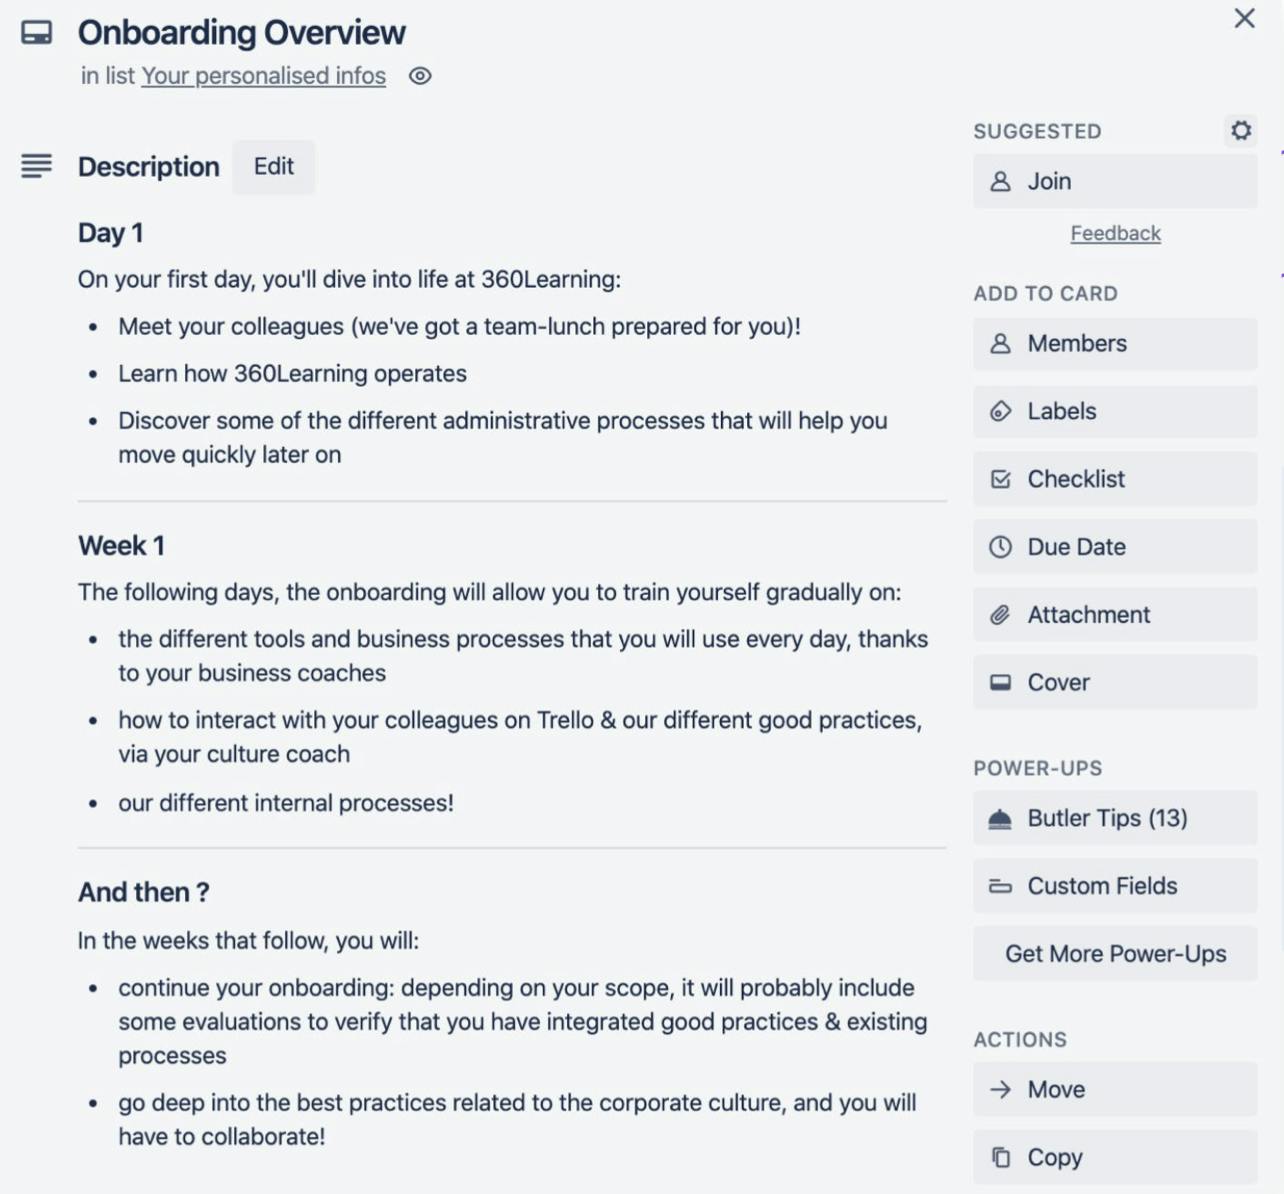 32 Onboarding Templates and Checklists to Design Great New Hire Experiences